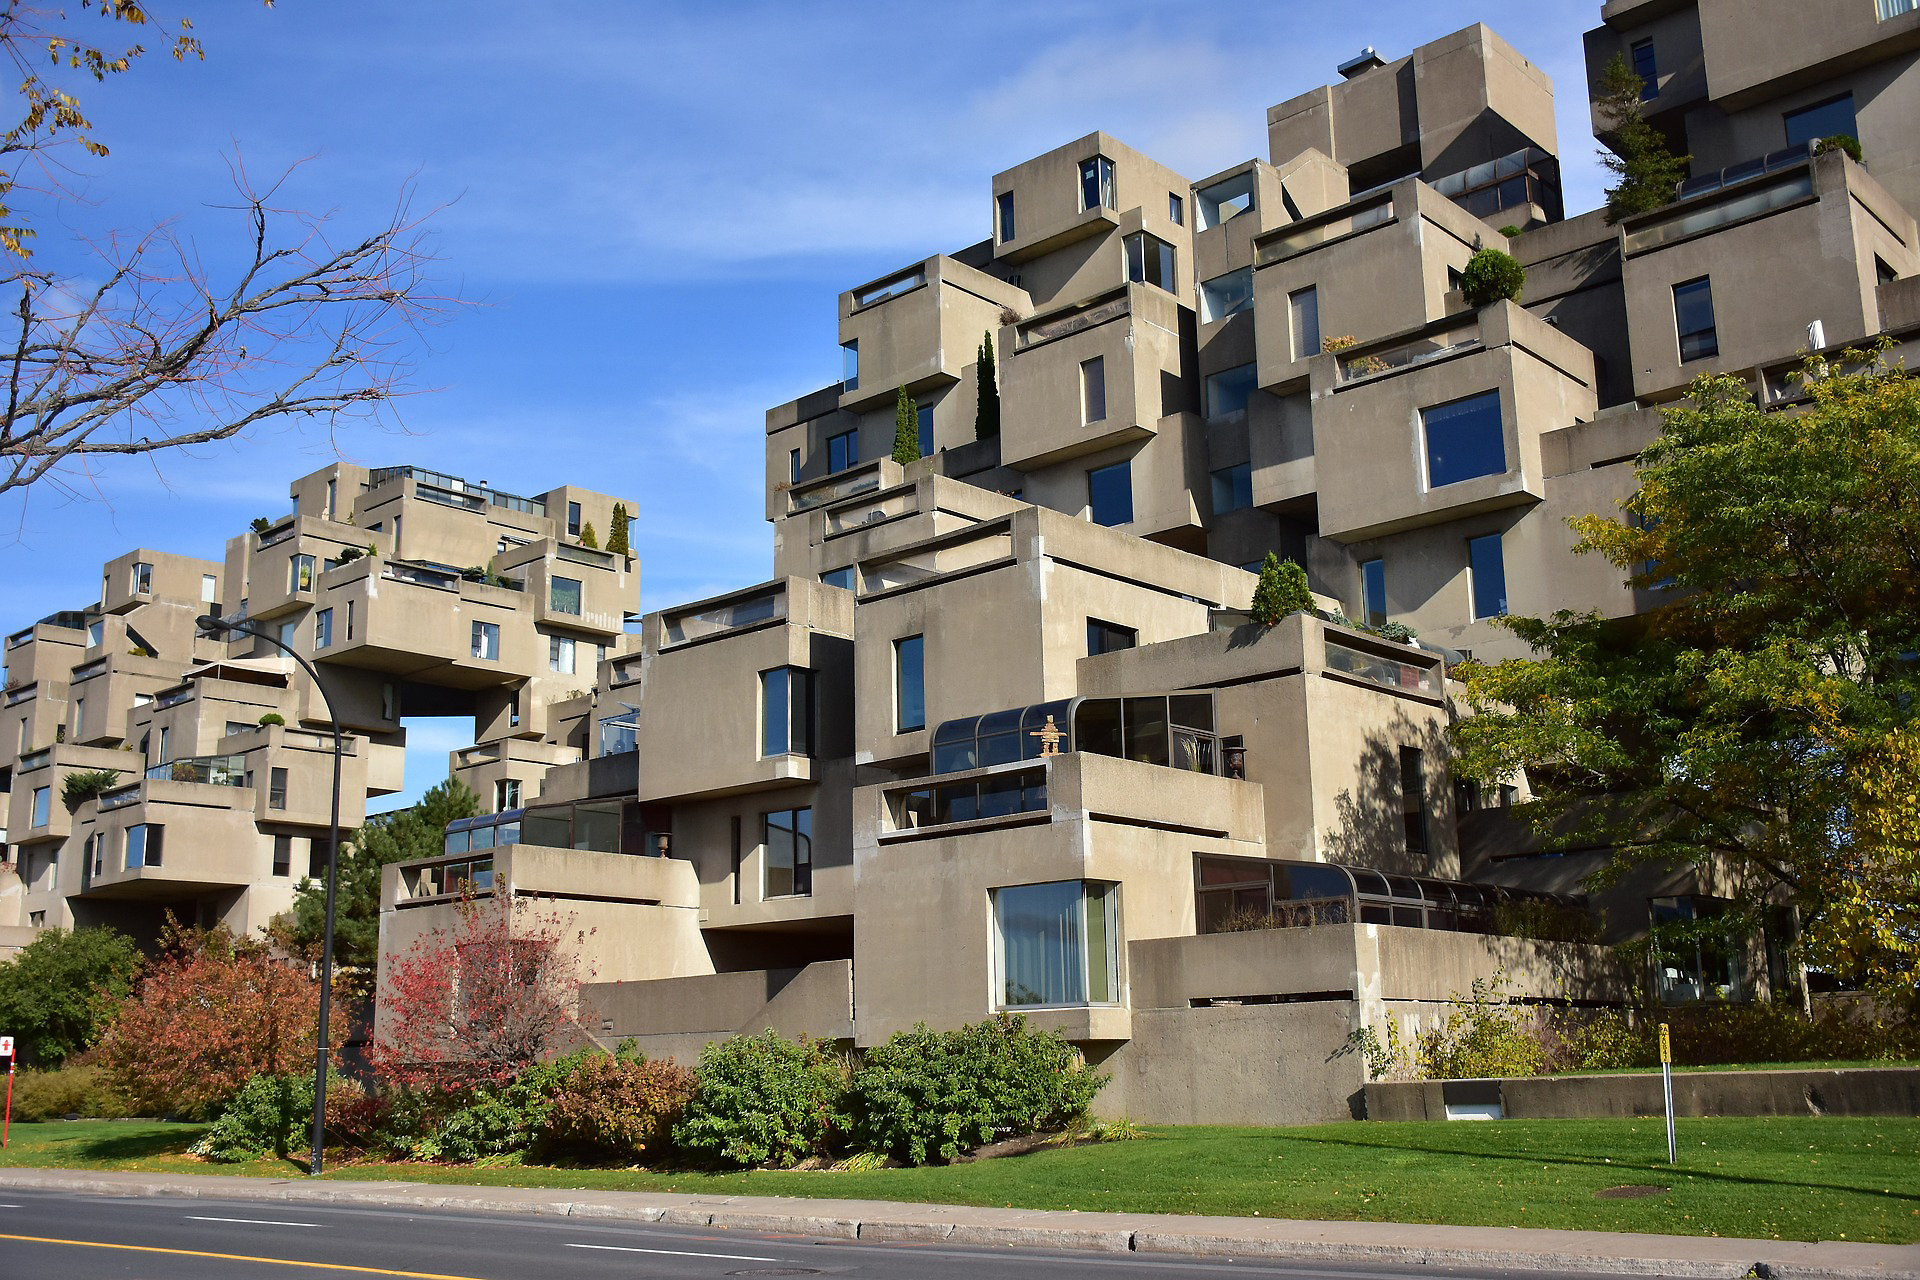 Regimenting the Body and Destroying the Soul—the Ugly Legacy of Brutalism